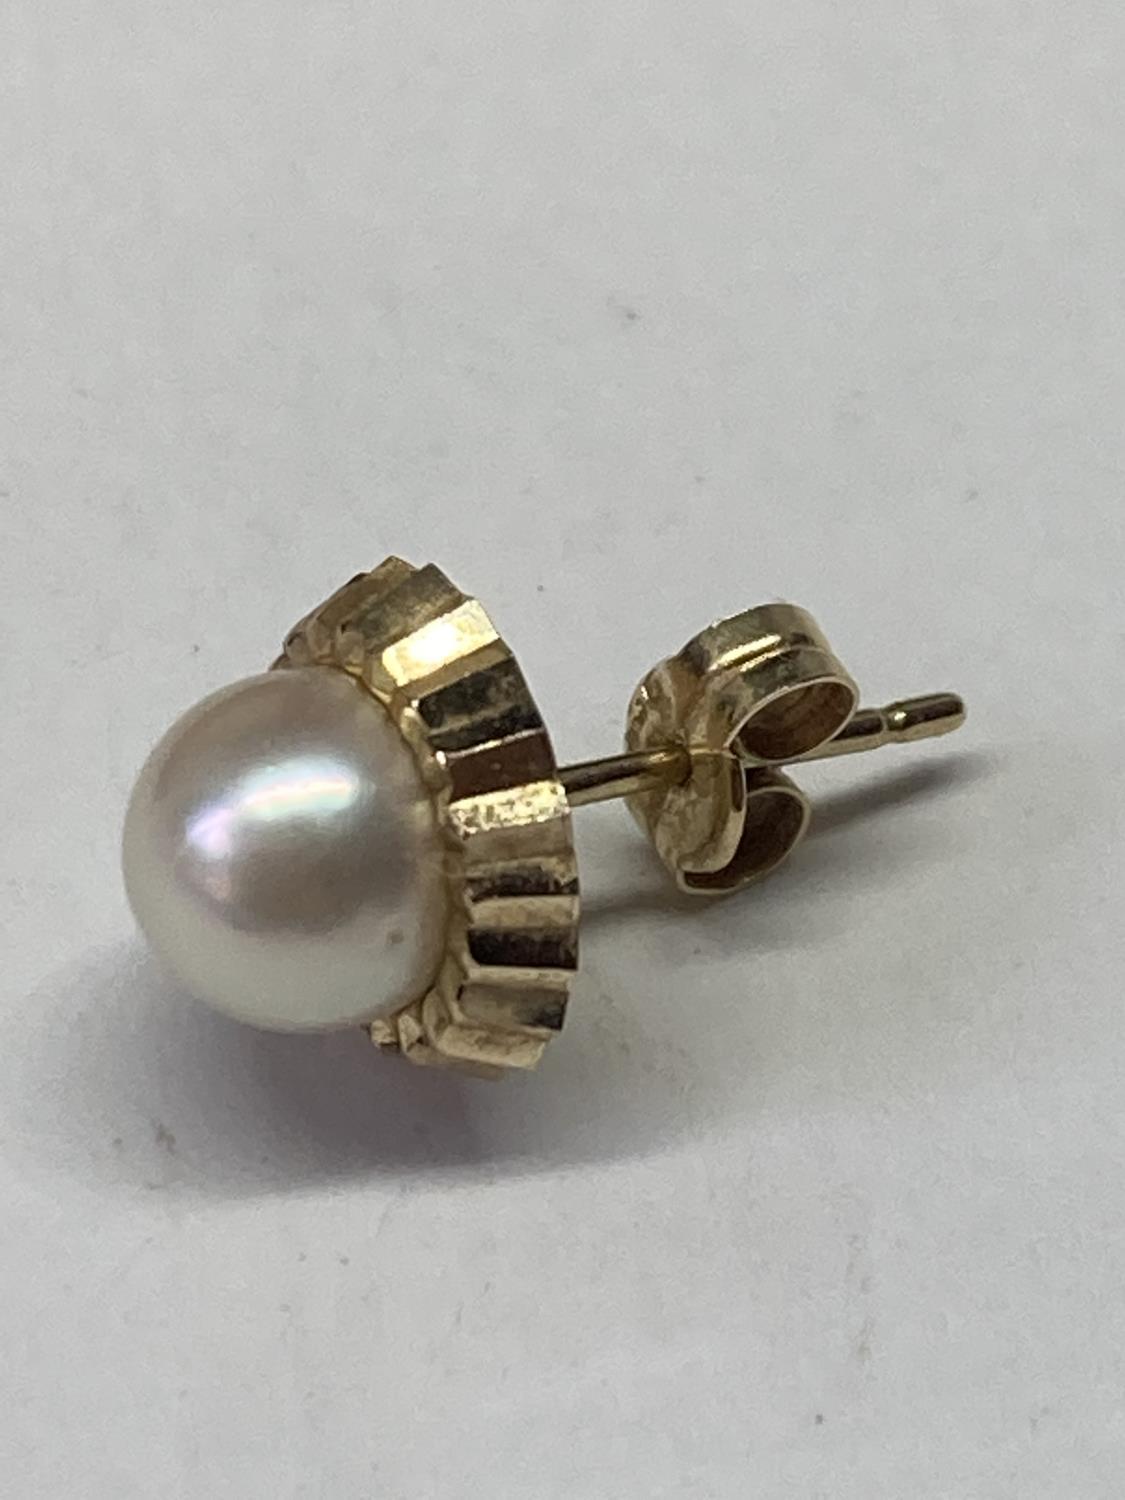 A PAIR OF 9 CARAT GOLD AND PEARL EARRINGS IN A PRESENTATION BOX - Image 3 of 8